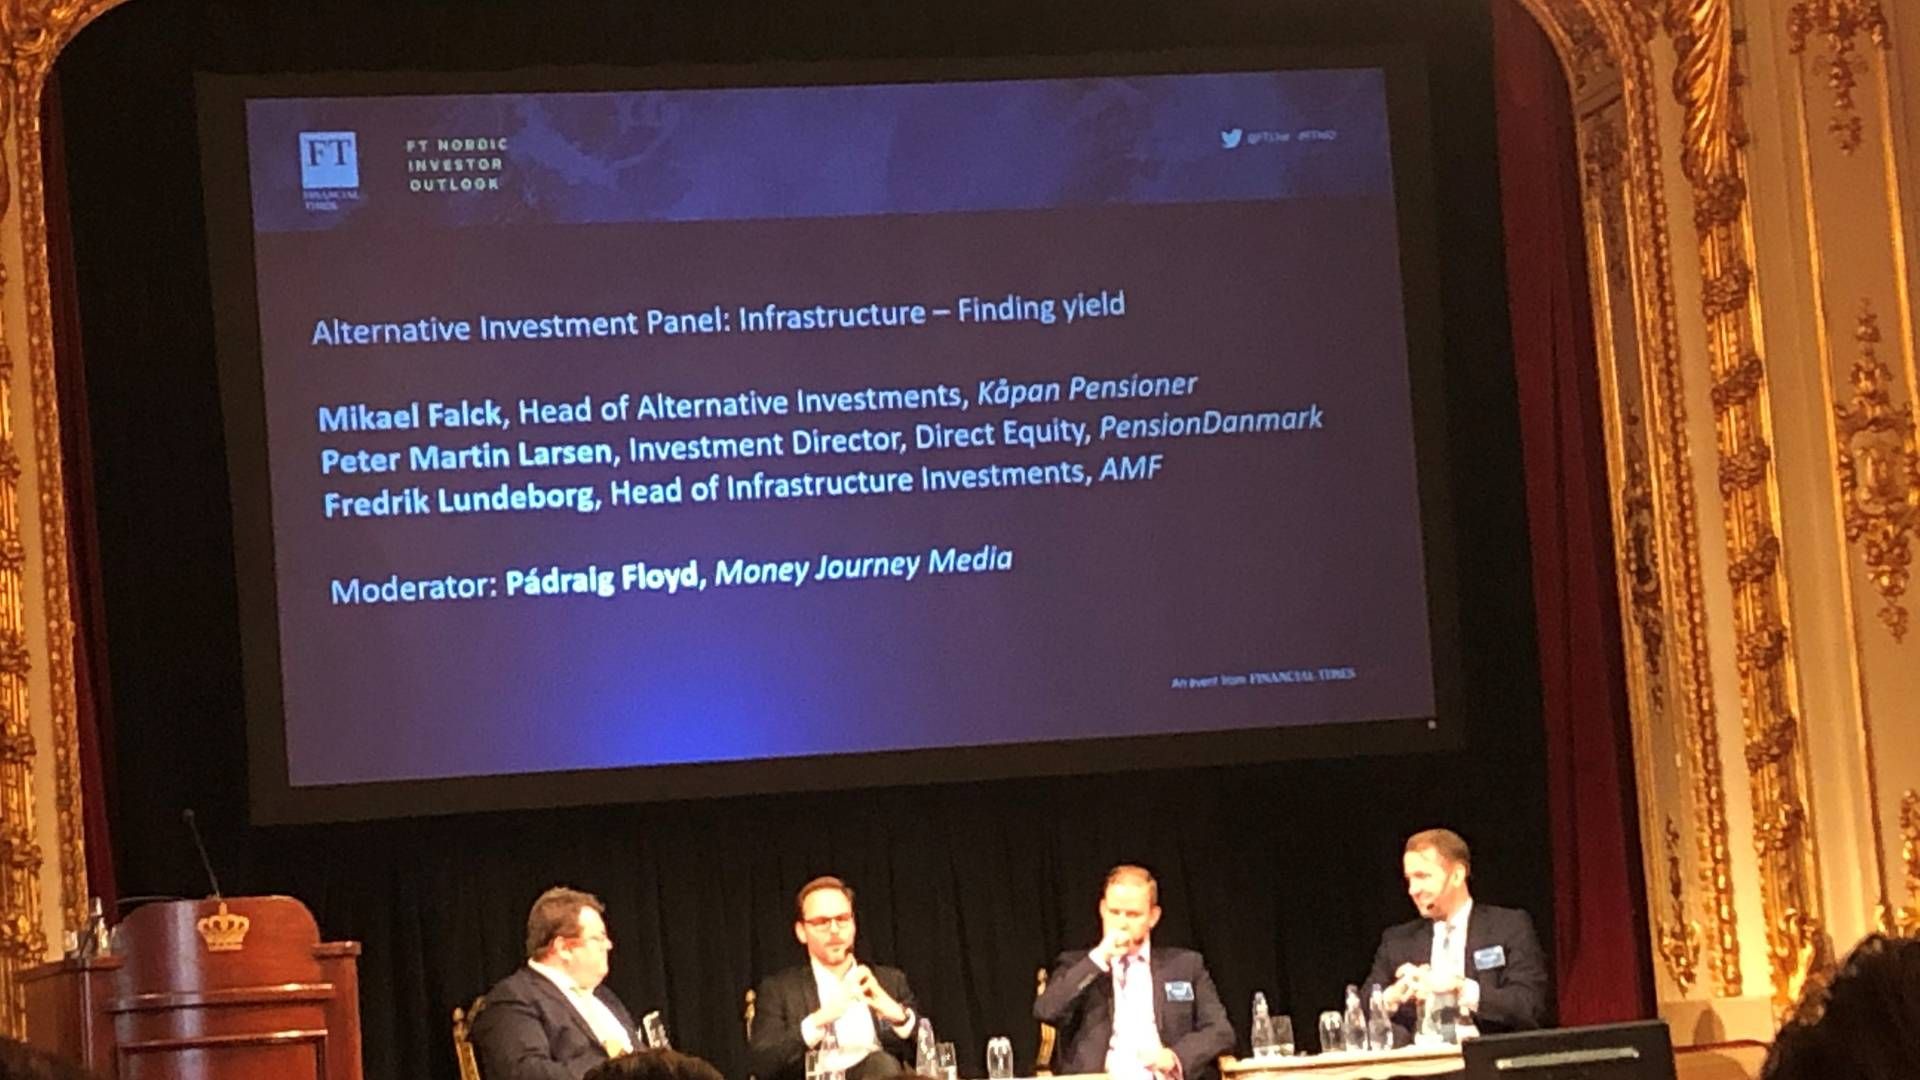 Alternative Investment Panel: Infrastructure - Finding yield. | Photo: BY SØREN TOP / AMWATCH